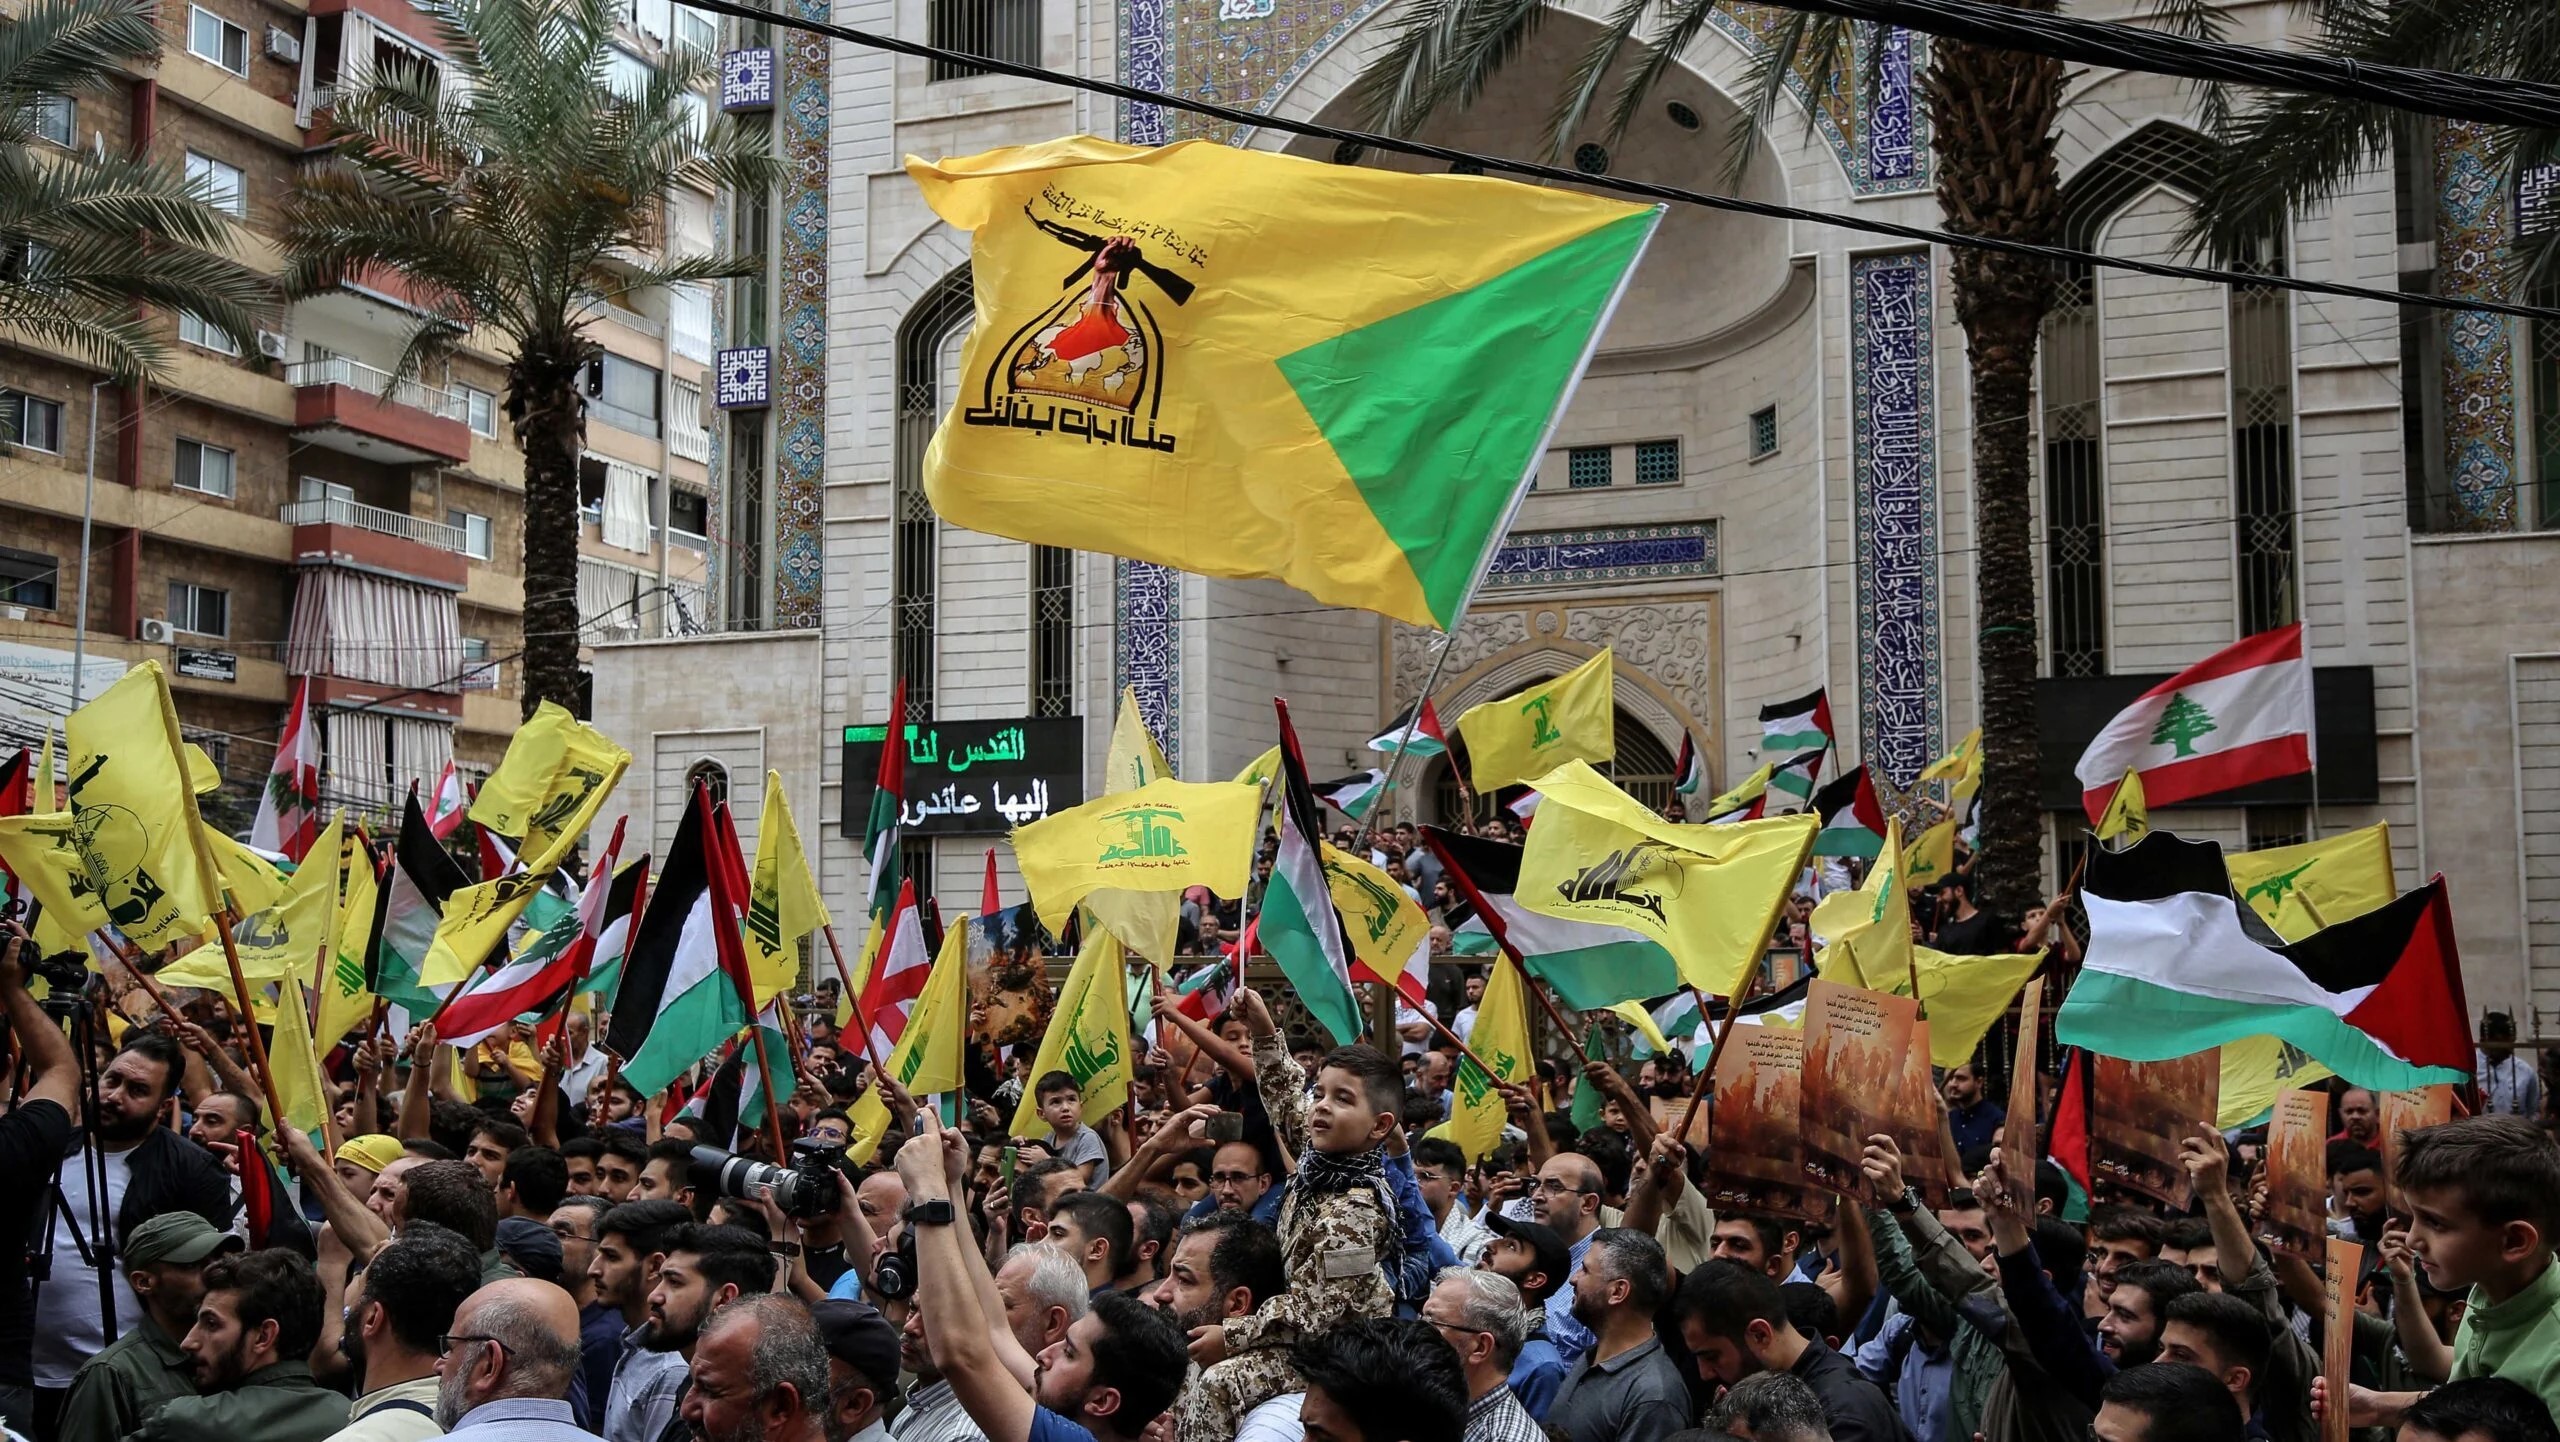 Hezbollah's statement regarding this group's attack on zonist sites